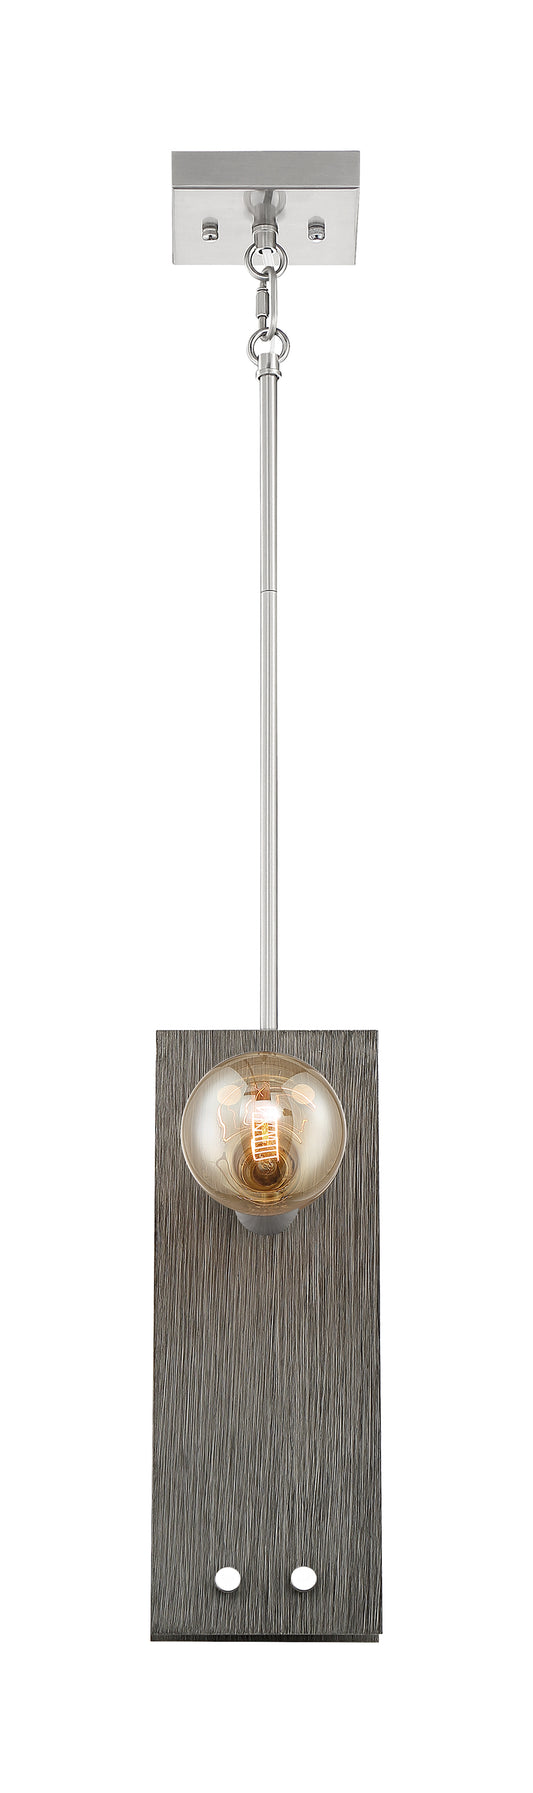 Stella - 2 Light Pendant with Driftwood - Brushed Nickel Accents Finish